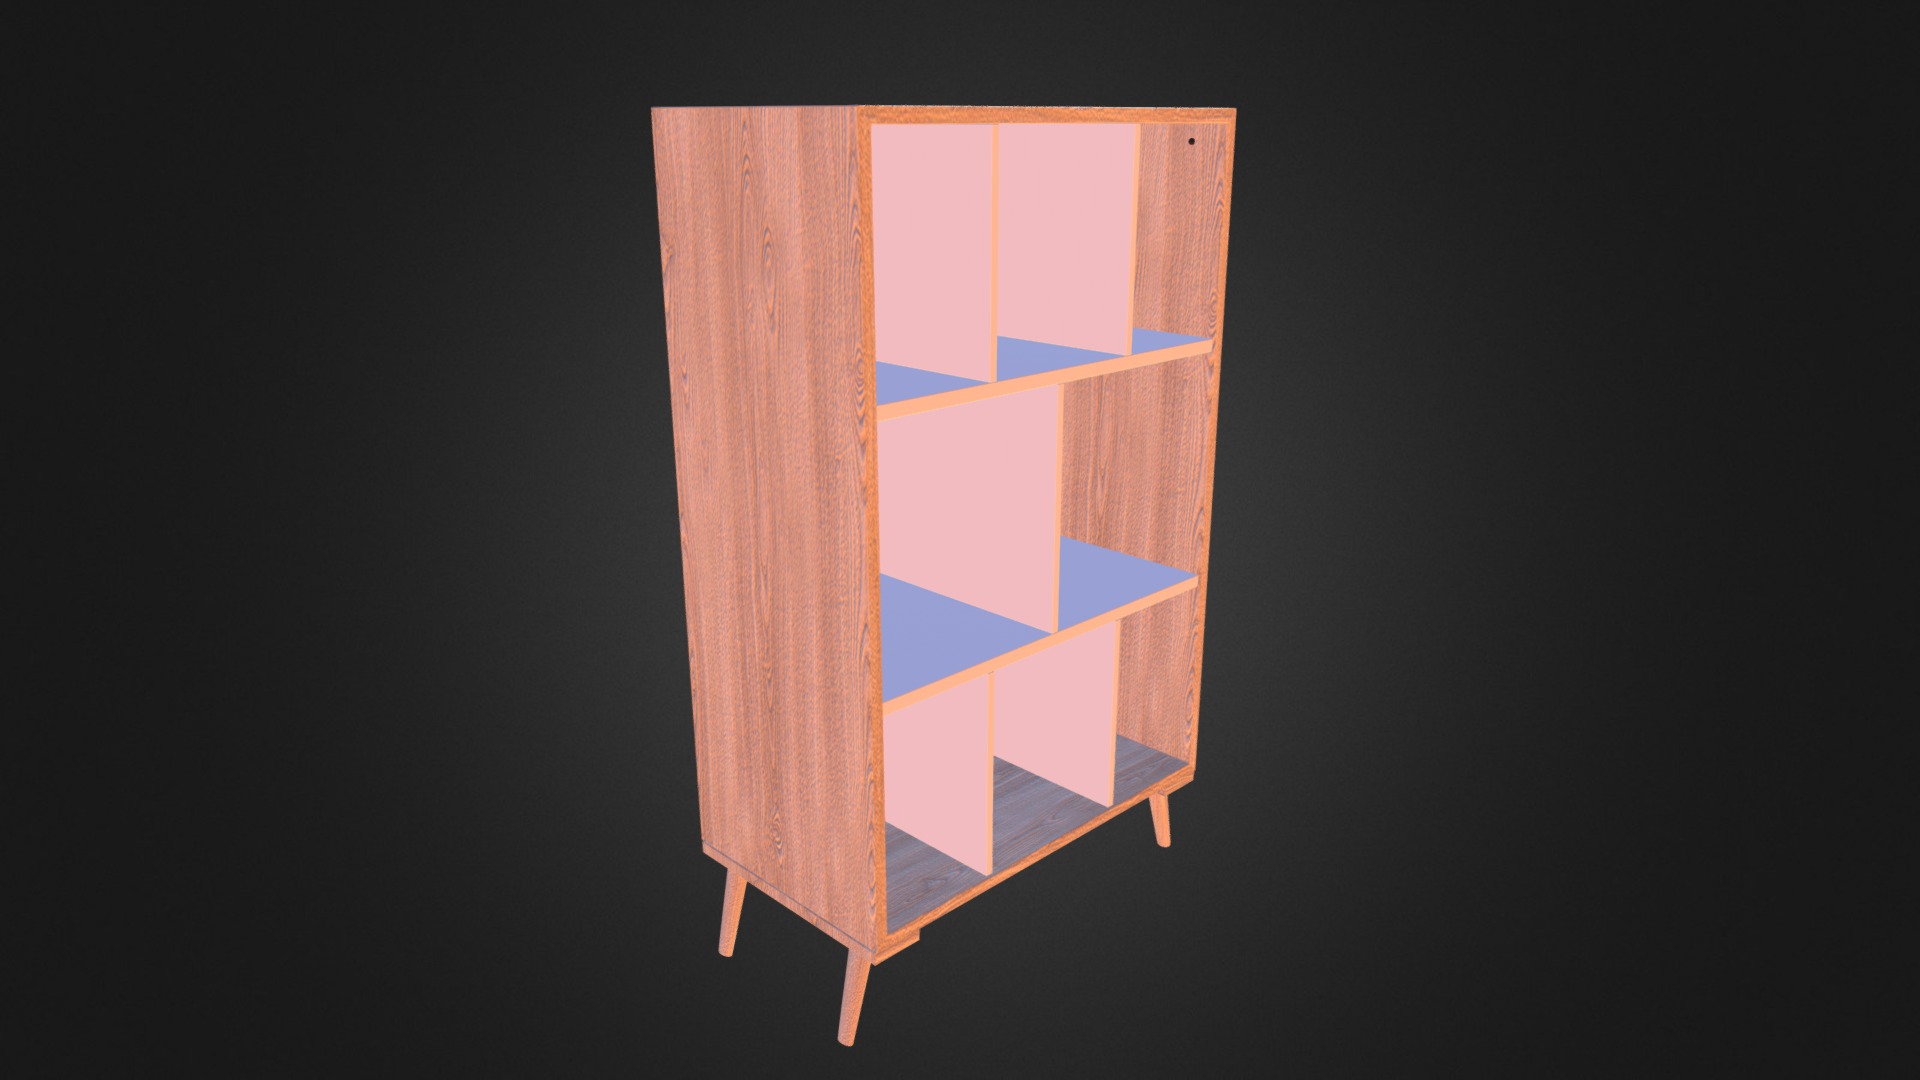 3D model Wooden Children’s Shelf - This is a 3D model of the Wooden Children's Shelf. The 3D model is about a wooden chair with a blue and white design.